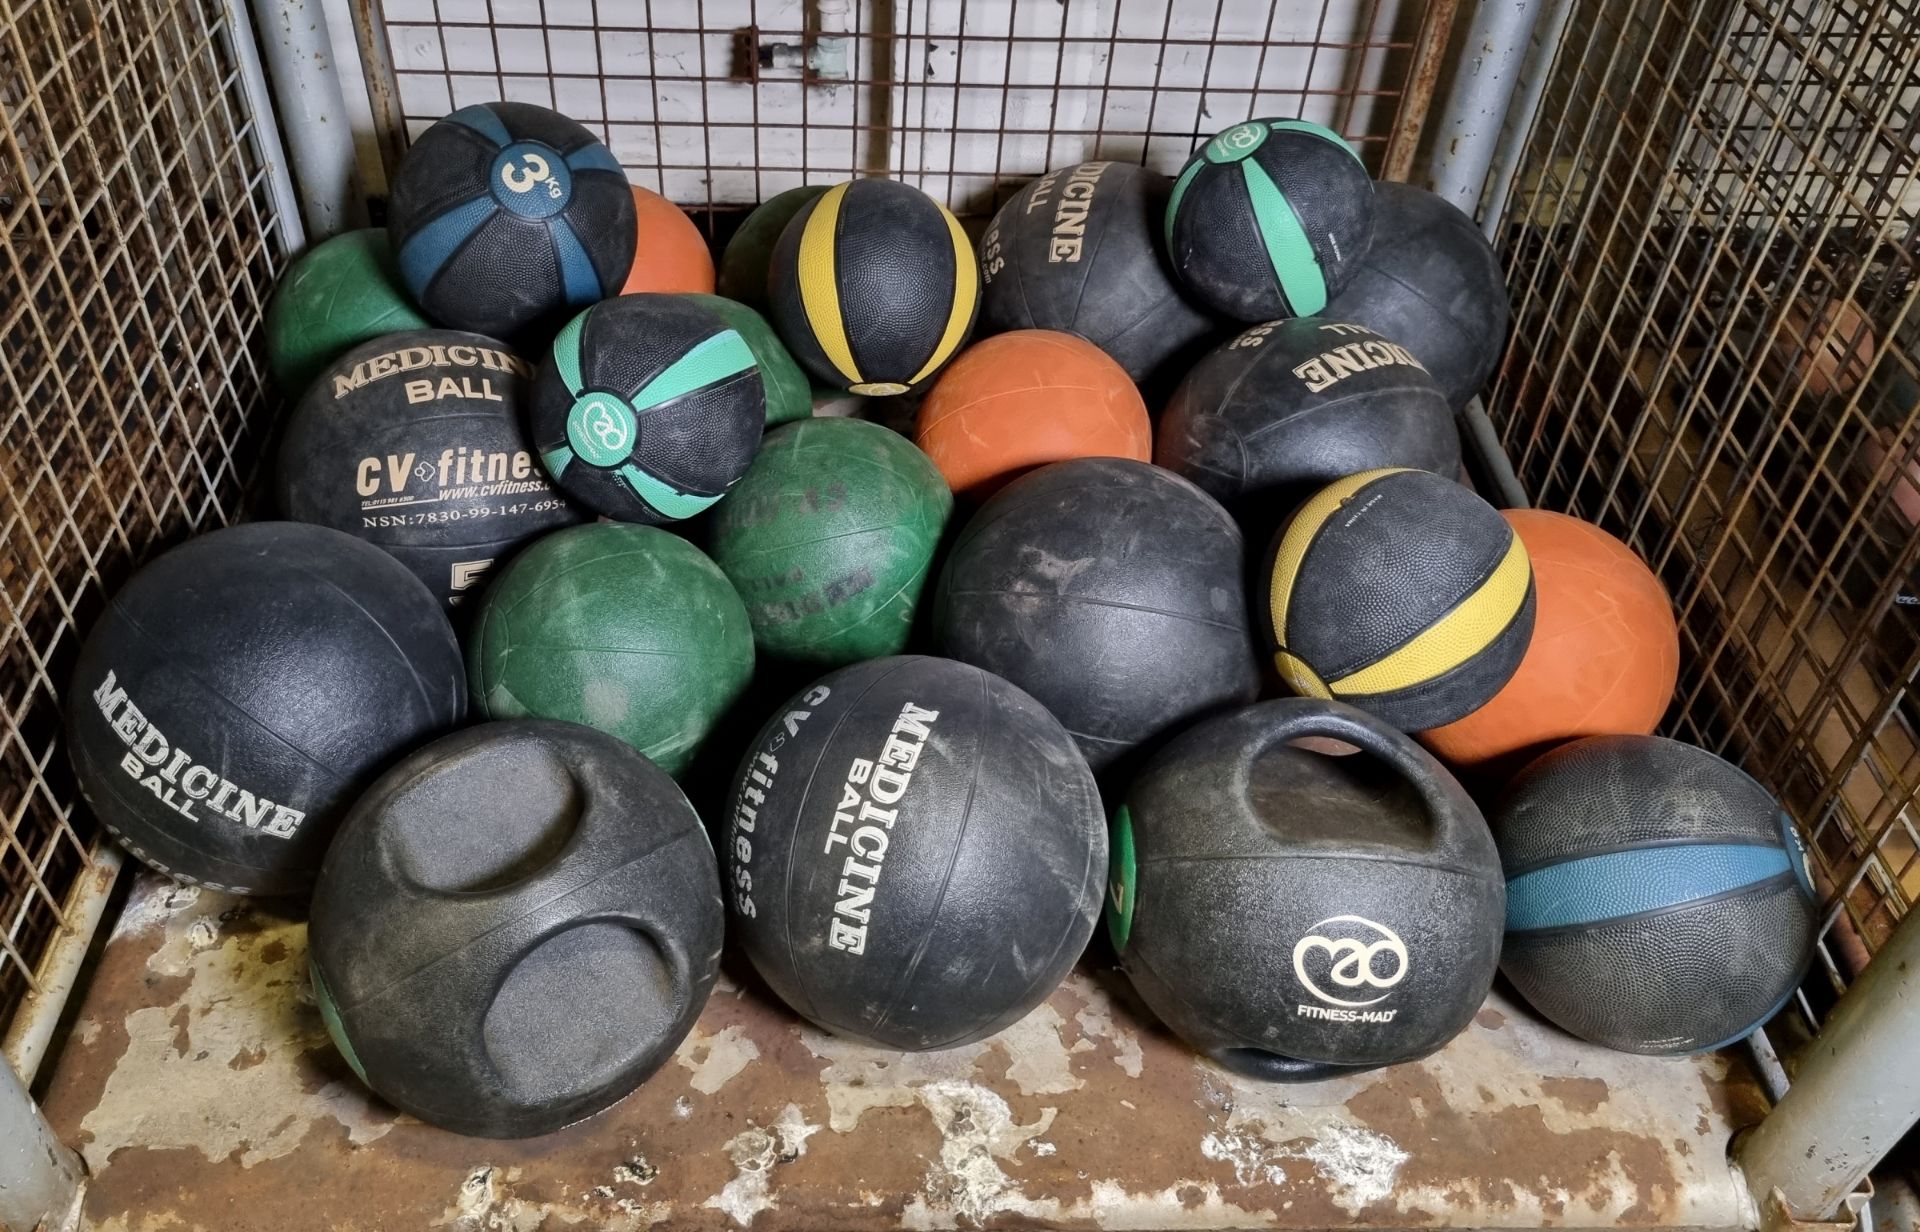 23x Medicine balls multiple sizes and weights - Image 2 of 3